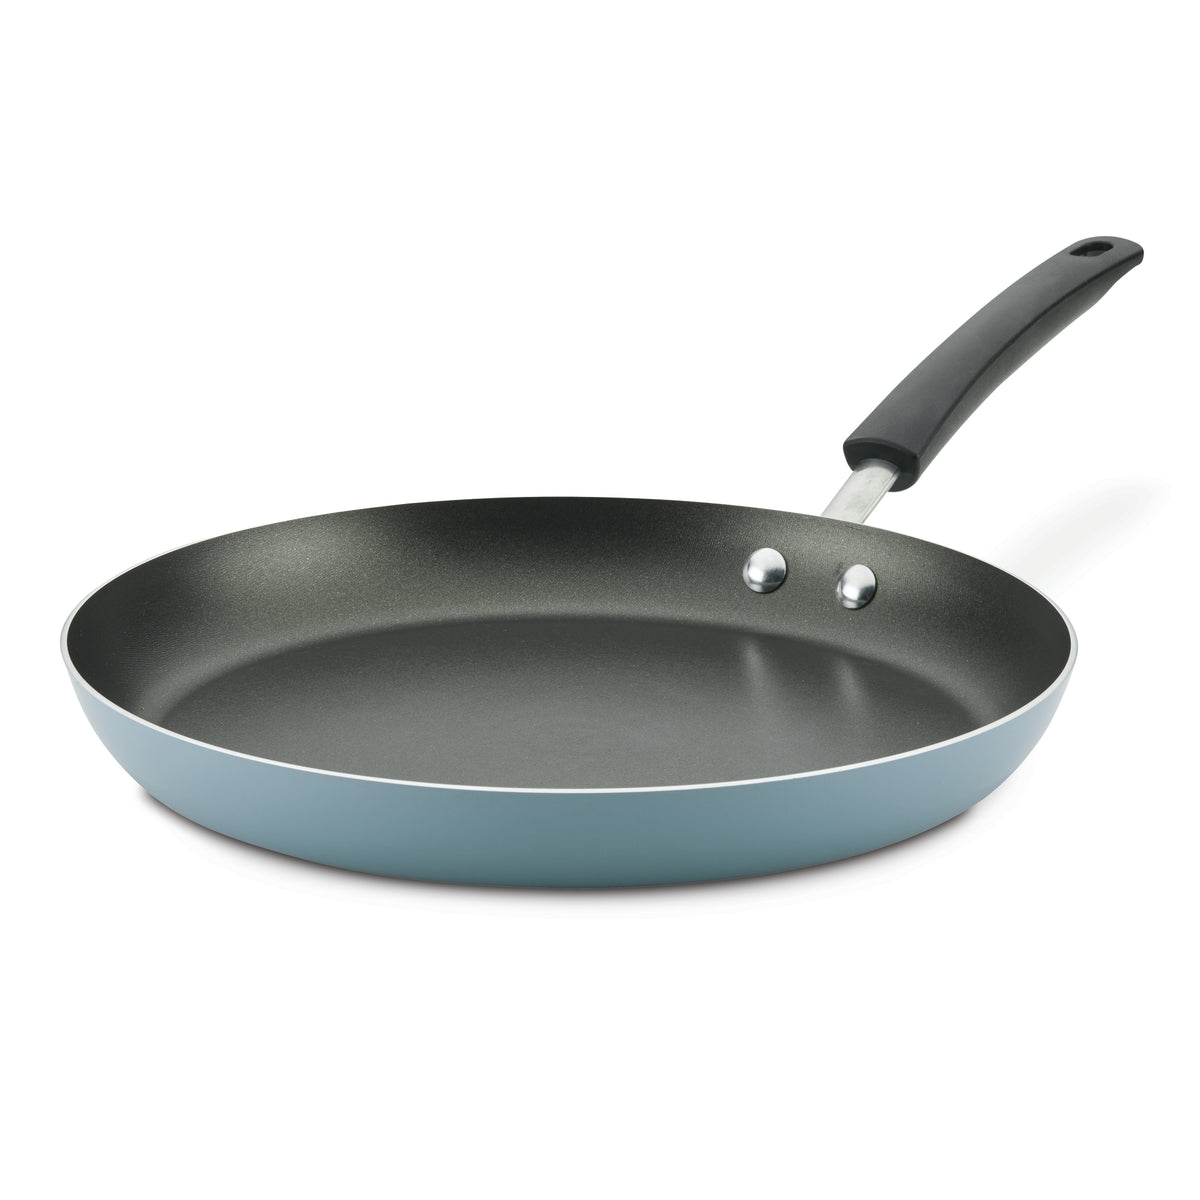 Choice 2-Piece Aluminum Non-Stick Fry Pan Set with Blue Silicone Handles -  8 and 10 Frying Pans